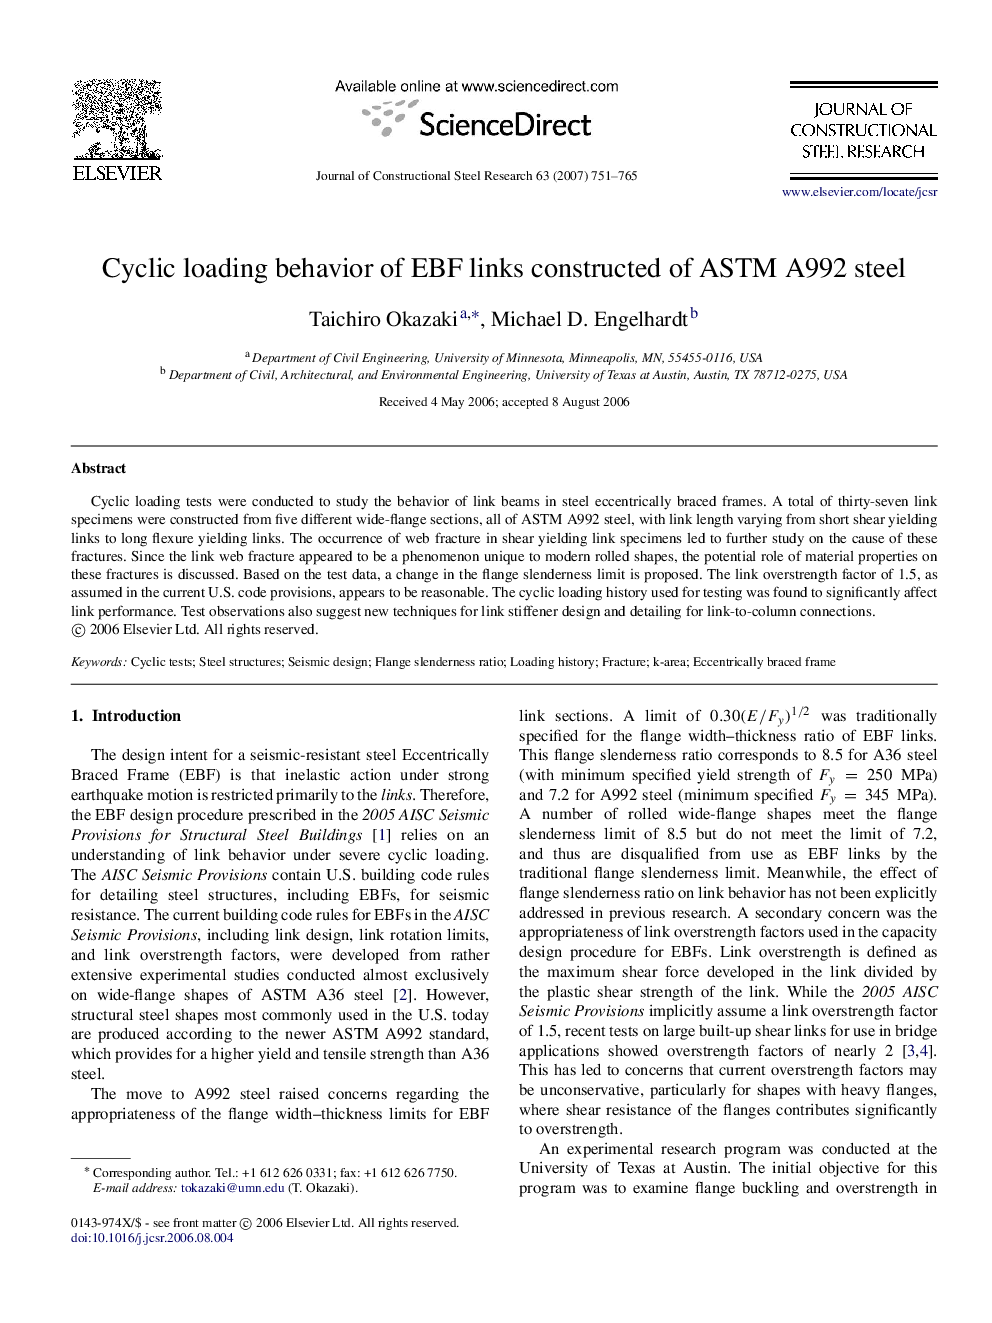 Cyclic loading behavior of EBF links constructed of ASTM A992 steel